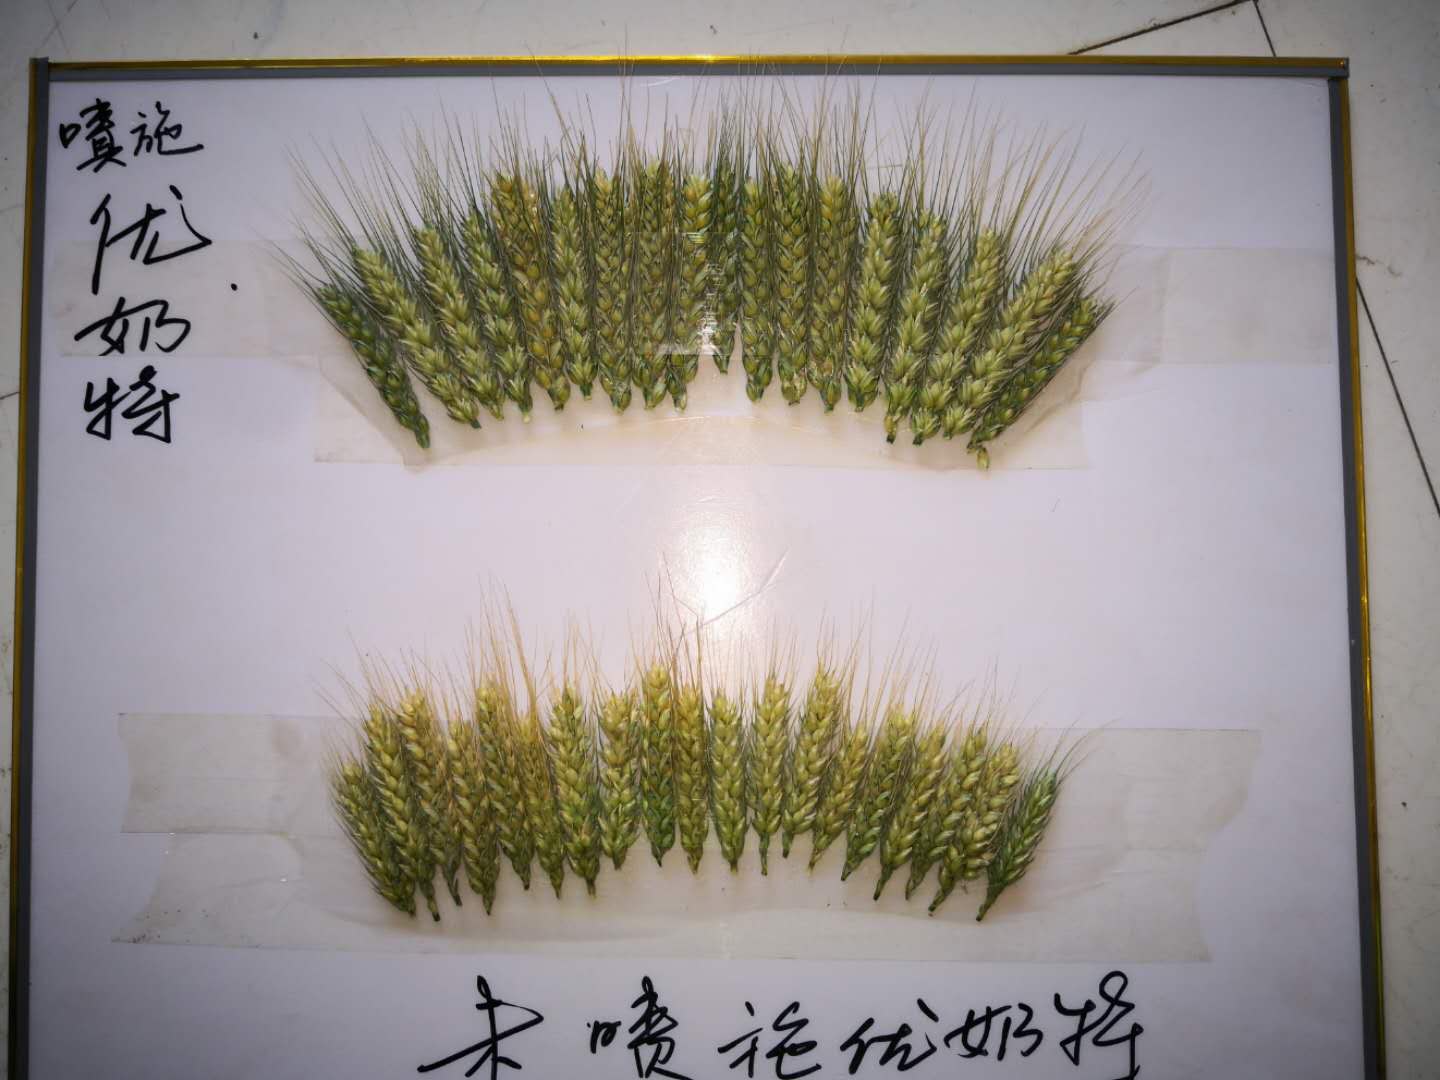 Observation on the Effect of Wheat Yield Increase of Younaite(图3)